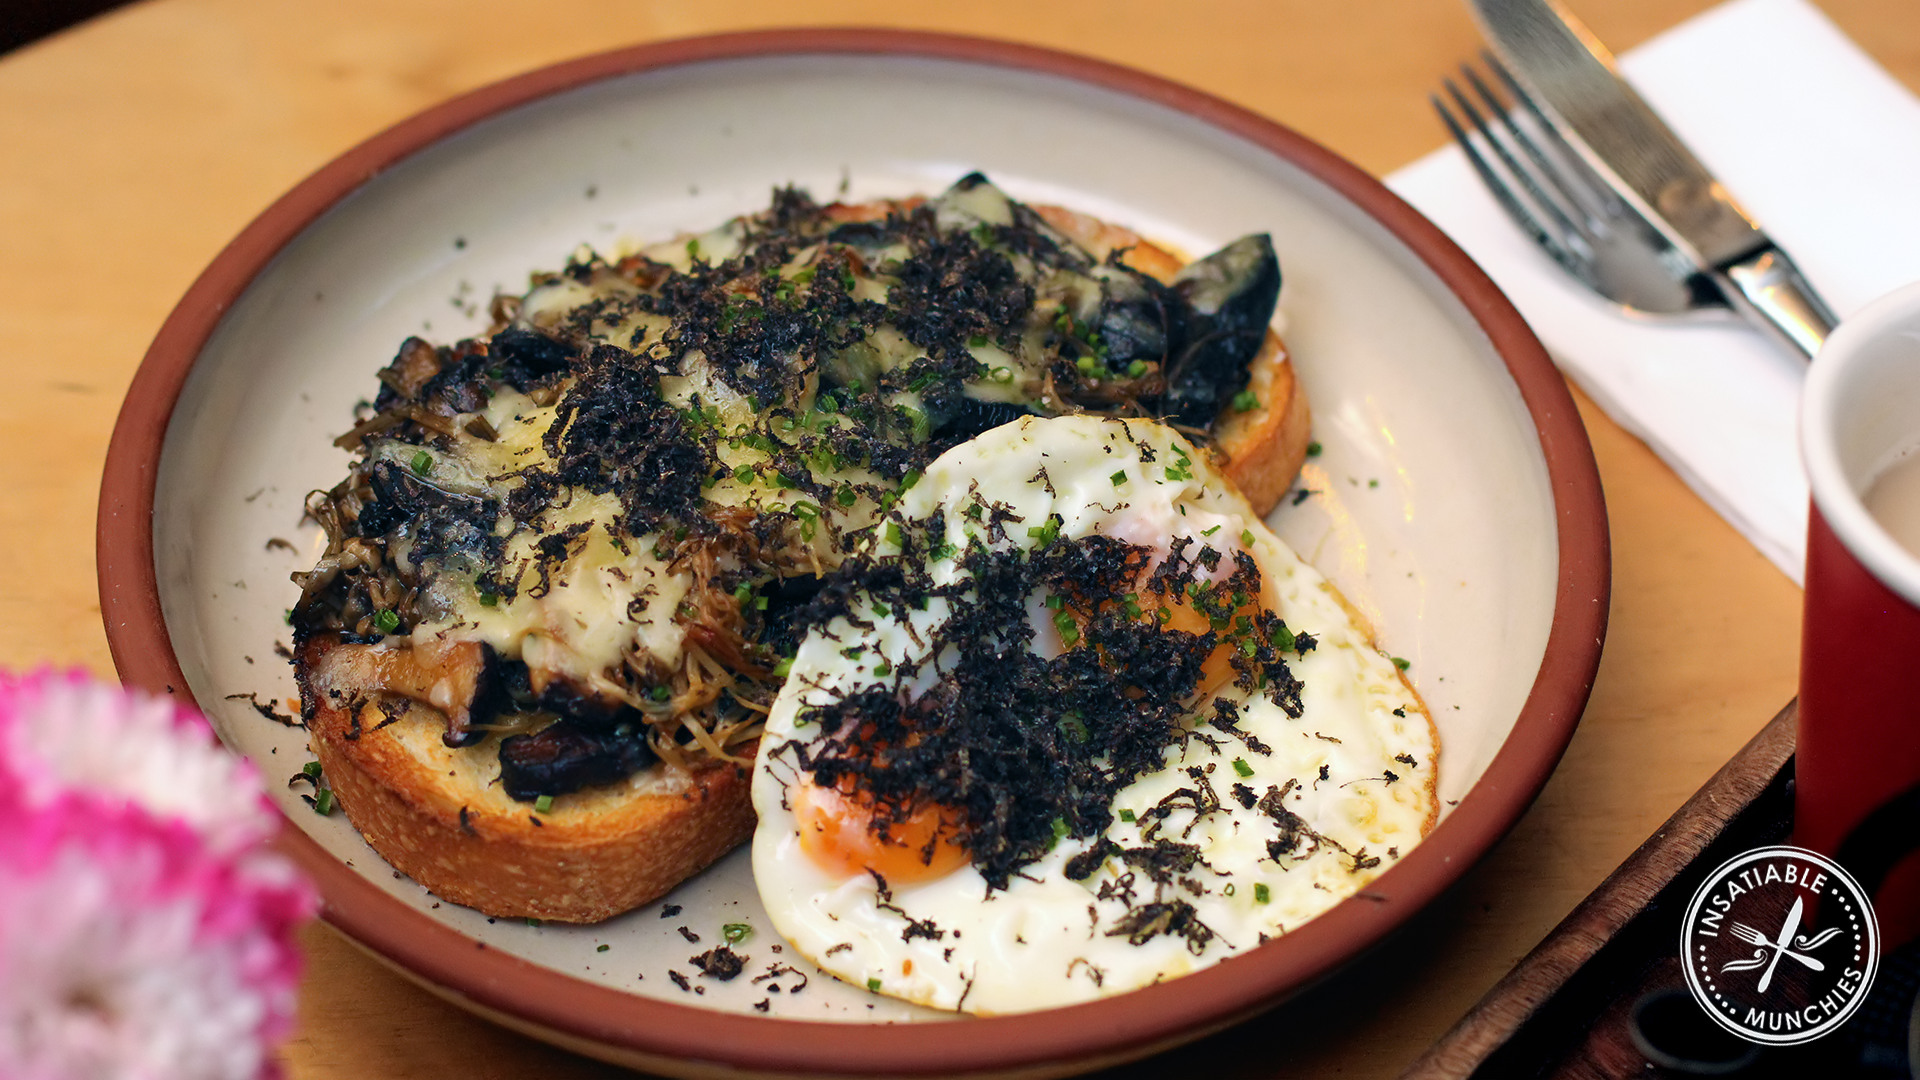 Ultimate toastie: mixed mushrooms laid on thick toasted sourdough, with melted cheese, and a side of sunny side up eggs. Topped with grated truffles. 